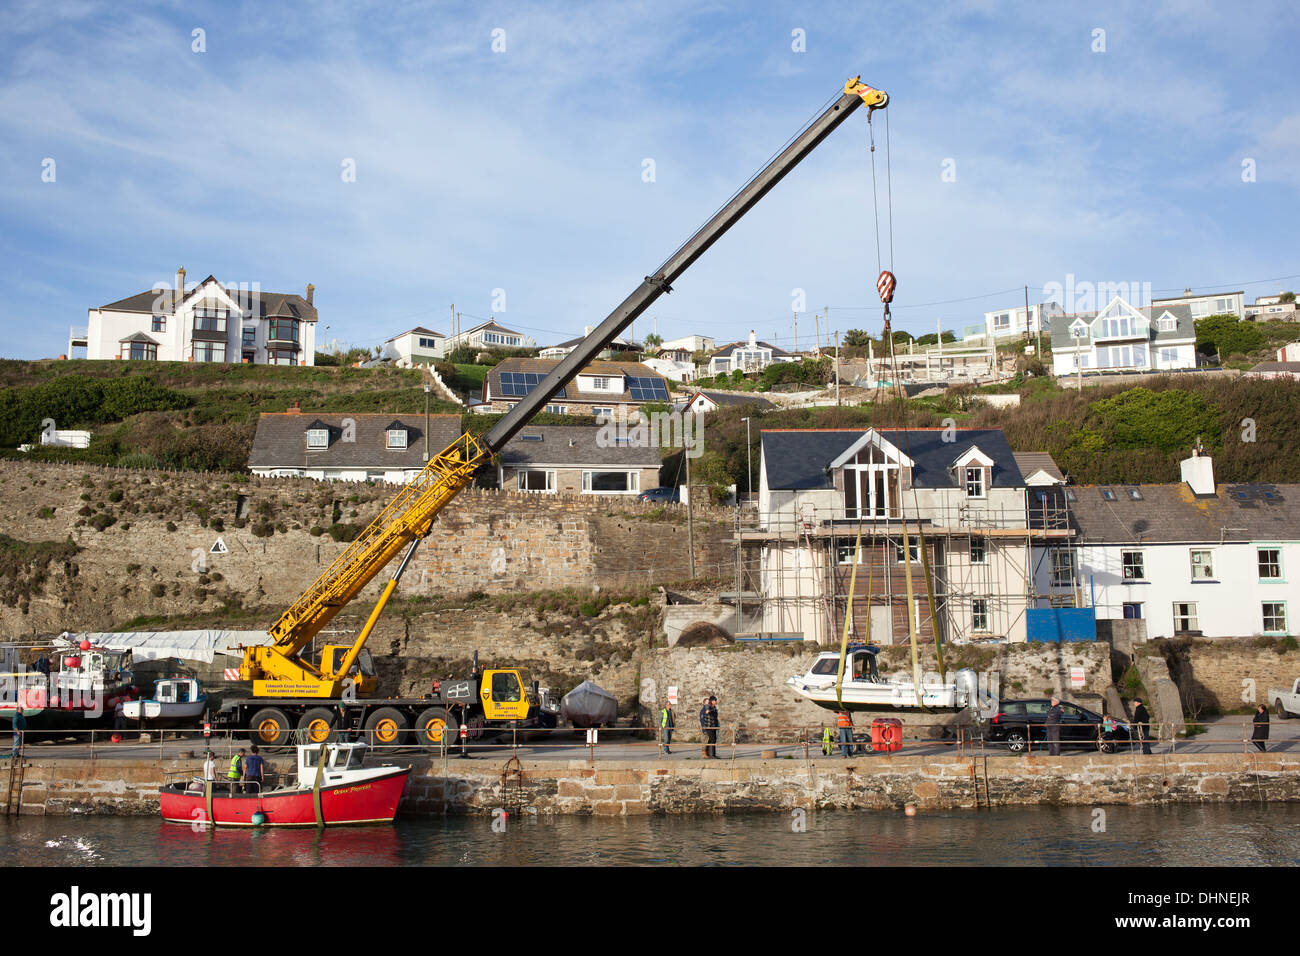 A large yellow crane raising boats out of Portreath harbour as the winter approaches, Cornwall England. Stock Photo